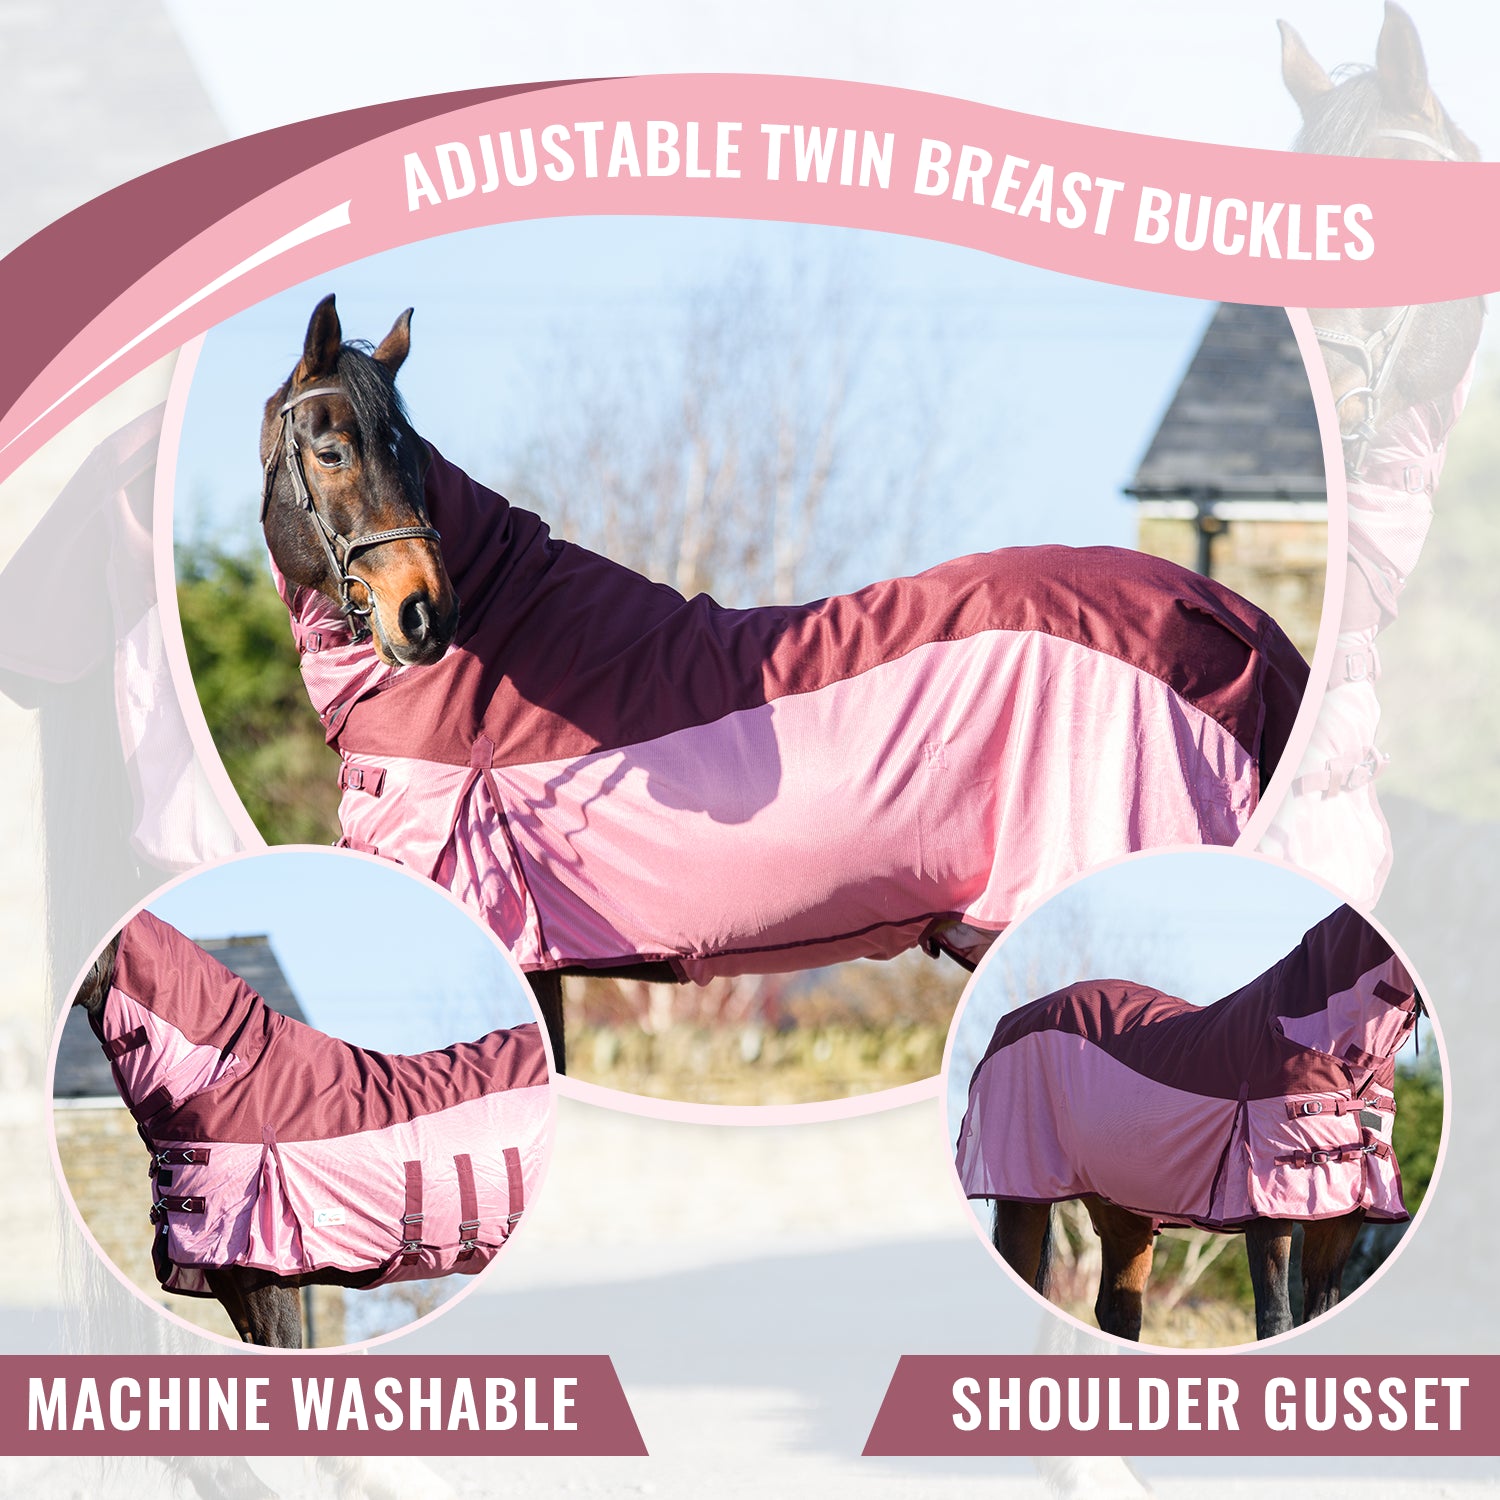 600D 2 in 1 Waterproof Fly Turnout Mesh Horse Rug Fixed Neck Burgundy/Pink 5'6-6'9 - Tack24